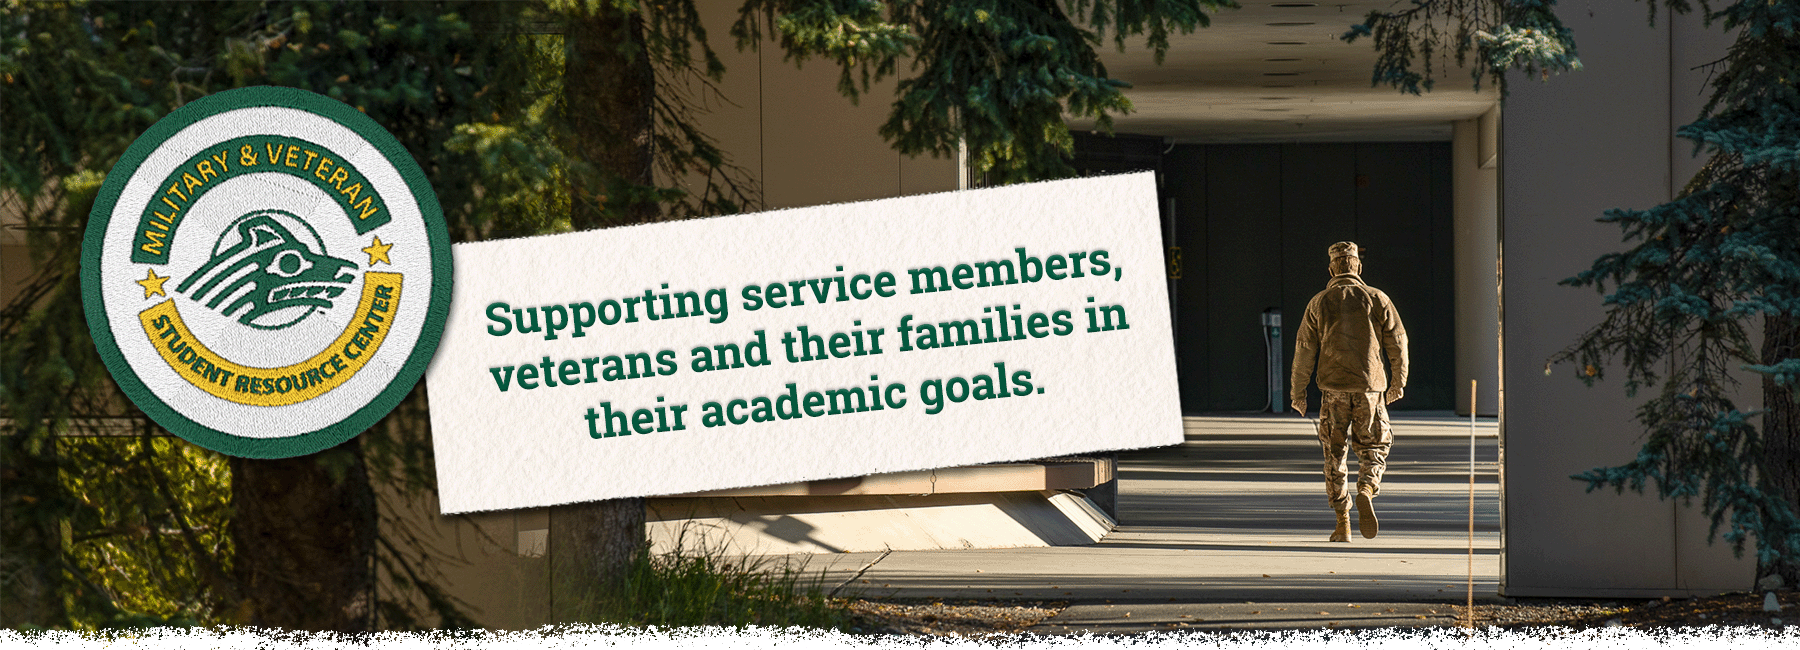 Supporting service members, veterans and their families in their academic goals.